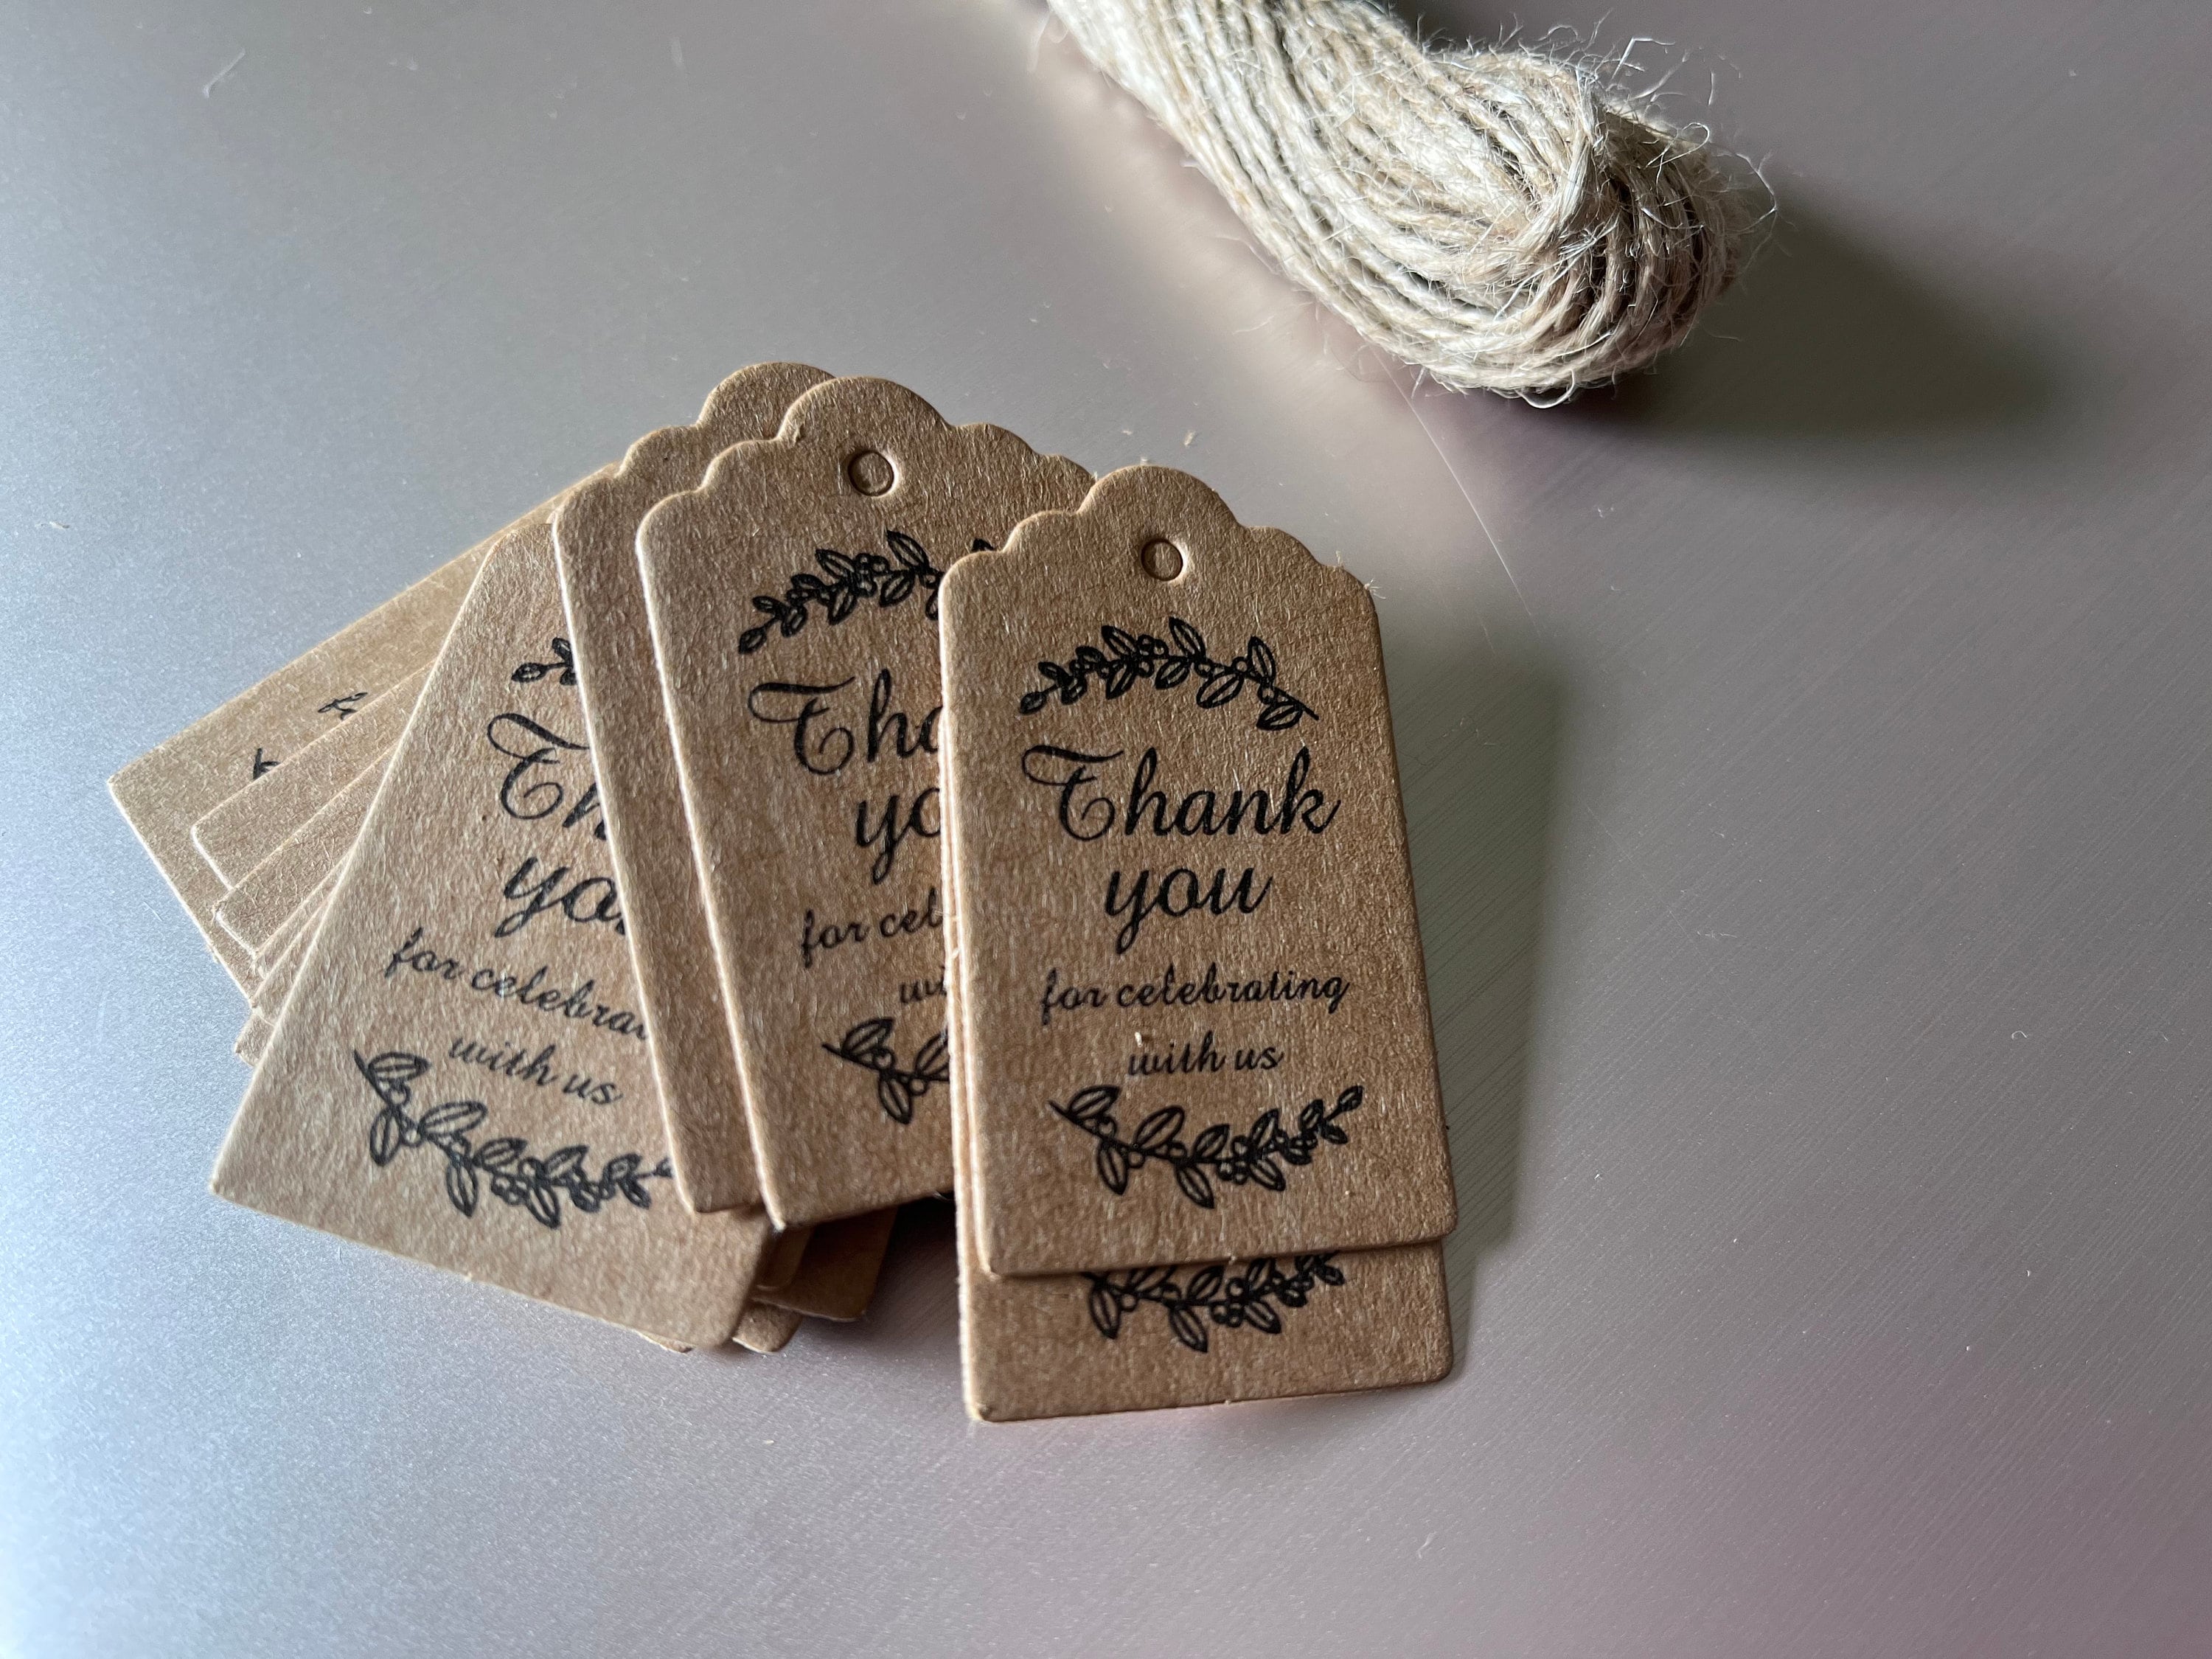 Cheers US 100Pcs /Set Kraft Paper Tags,Tags with String,Party Favor Gift  Tags for Wedding,Baby Shower,Bridal Shower Gift Tags/Kraft Hang Tags with  Free Cut Strings for Gifts, Crafts & Price Tags 